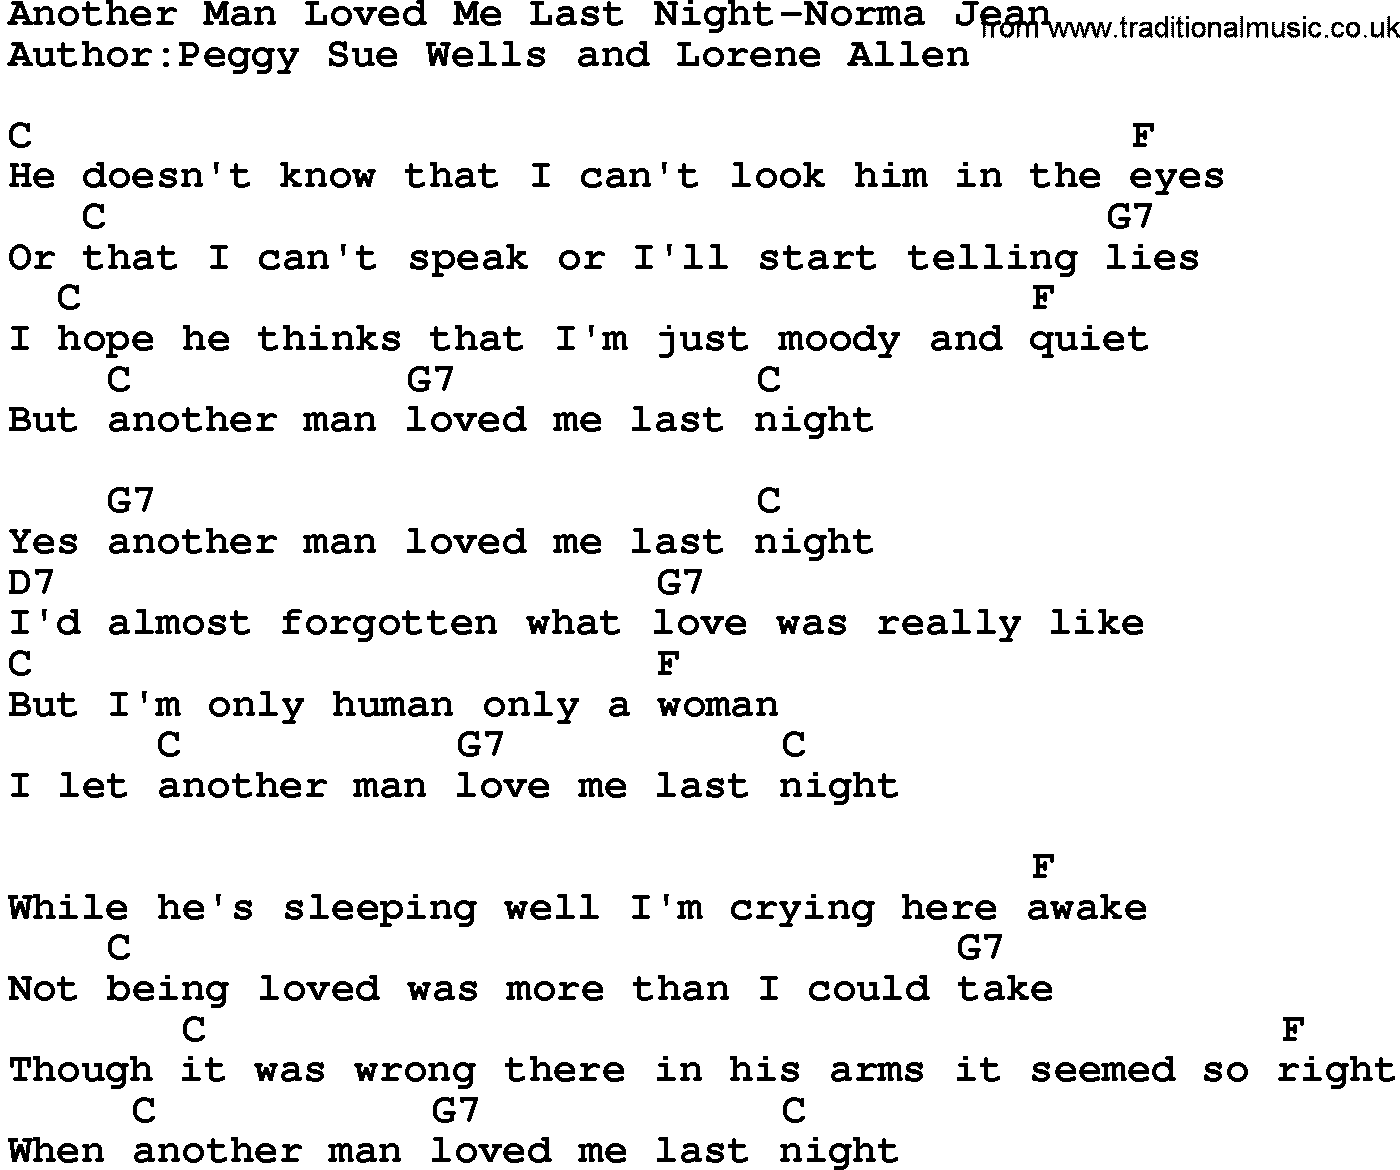 Country music song: Another Man Loved Me Last Night-Norma Jean lyrics and chords